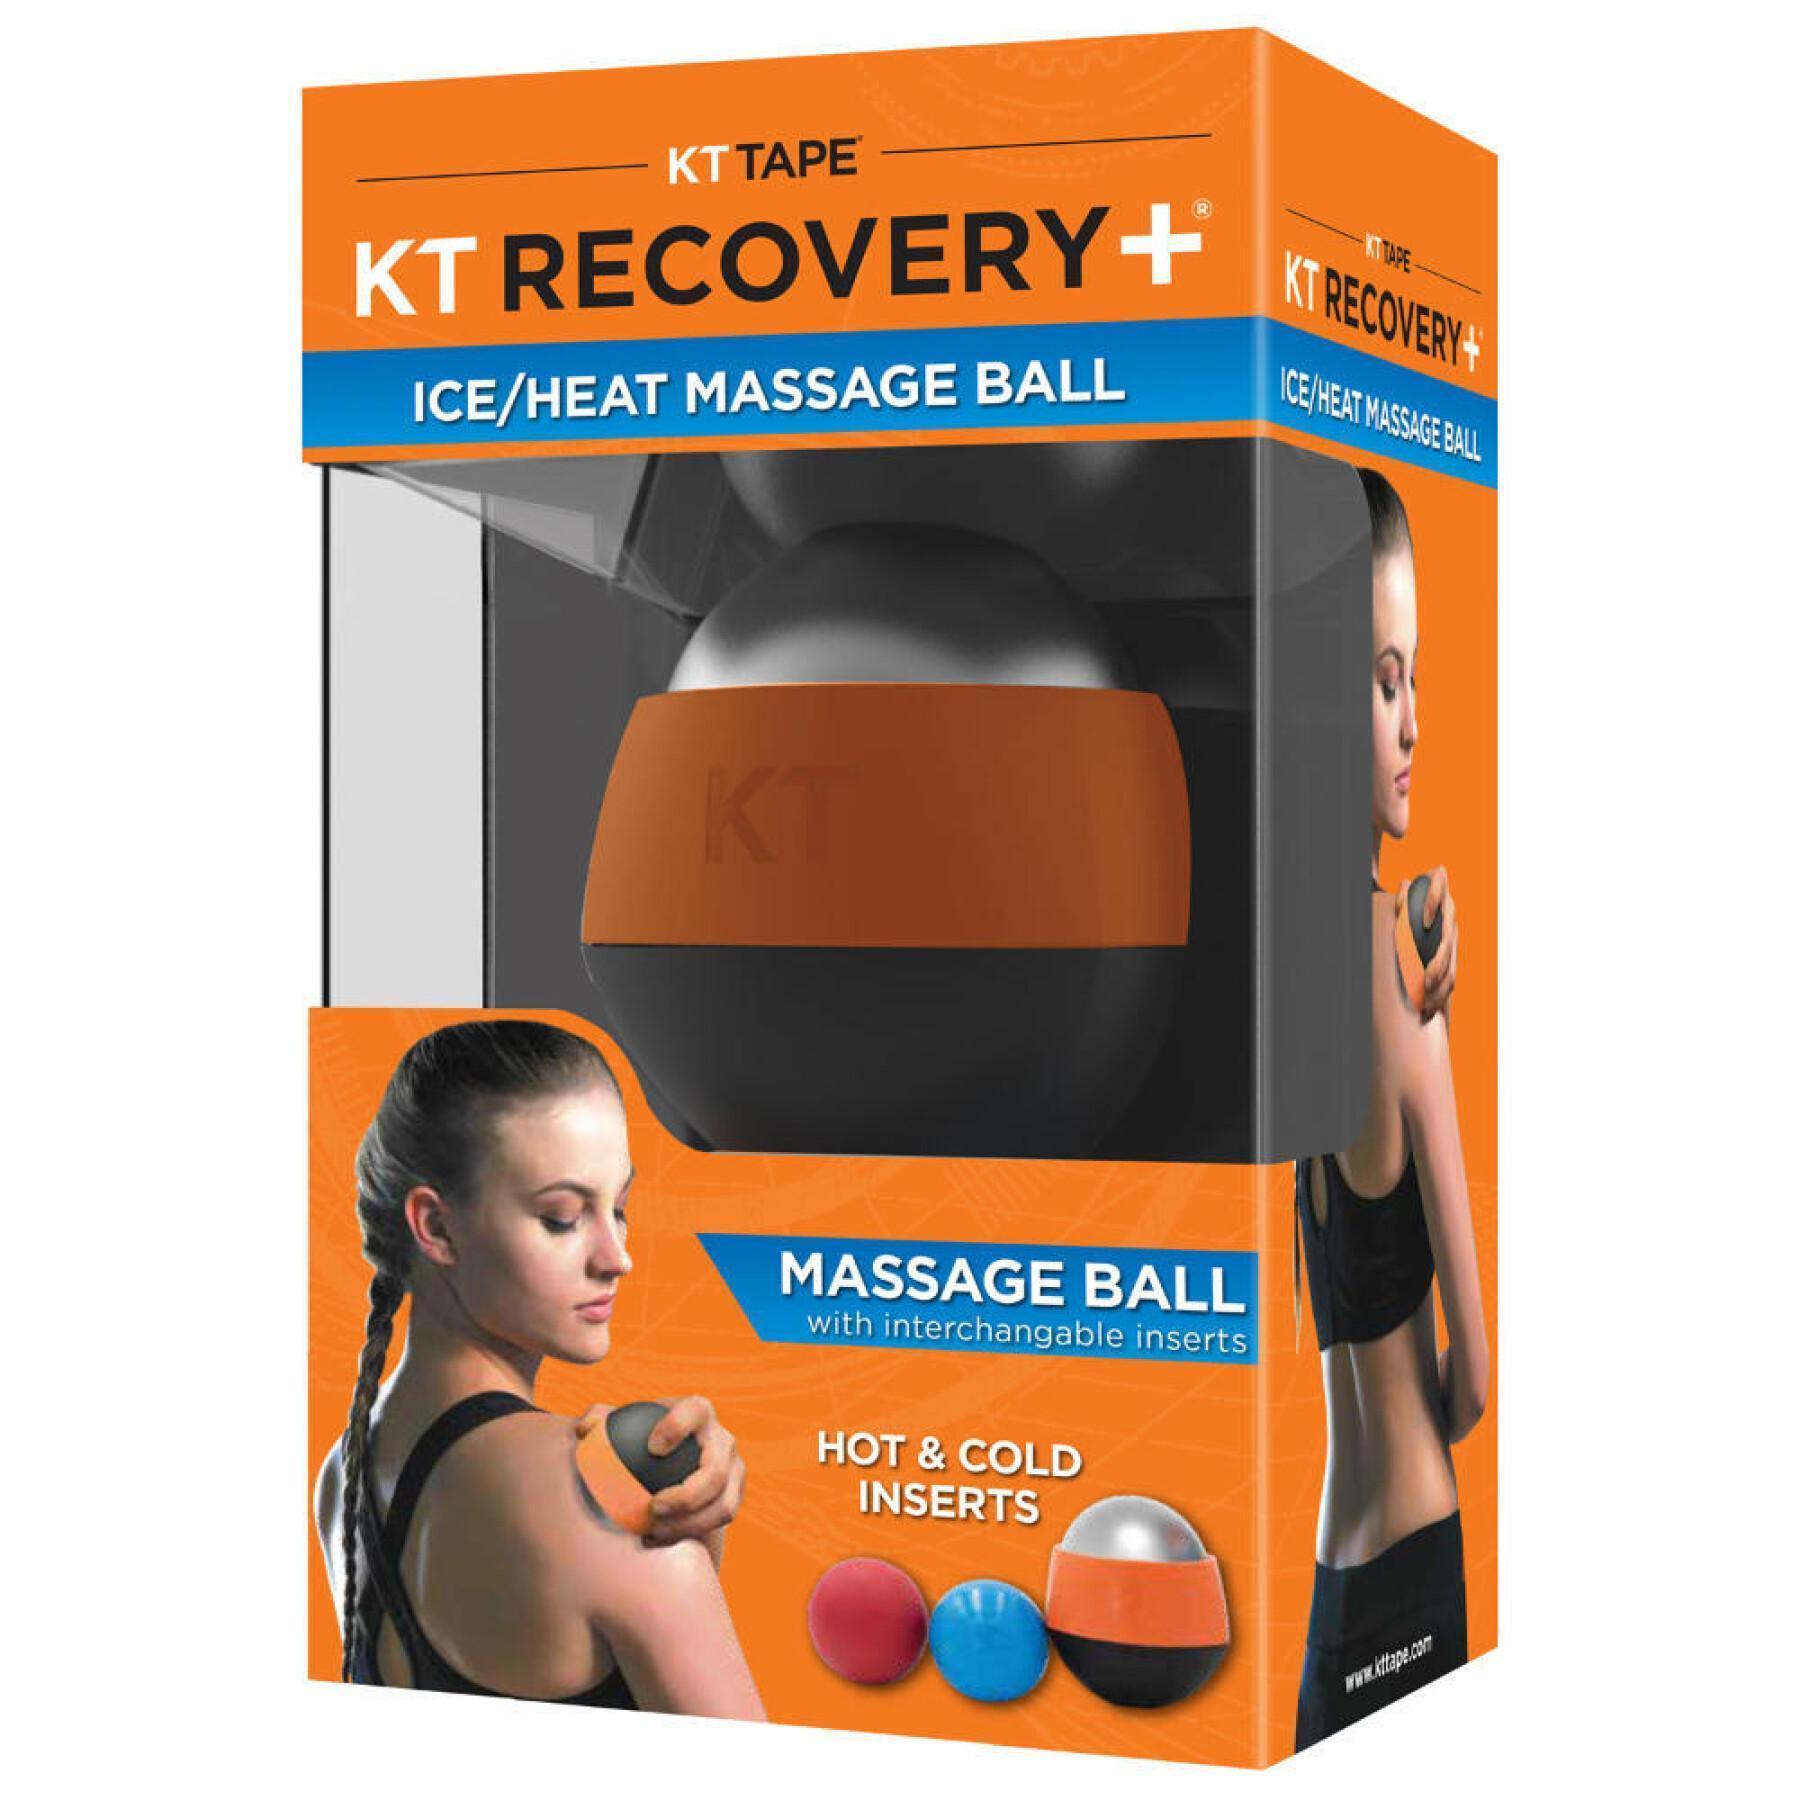 Women's hot/cold massage ball KT Tape KT Recovery+